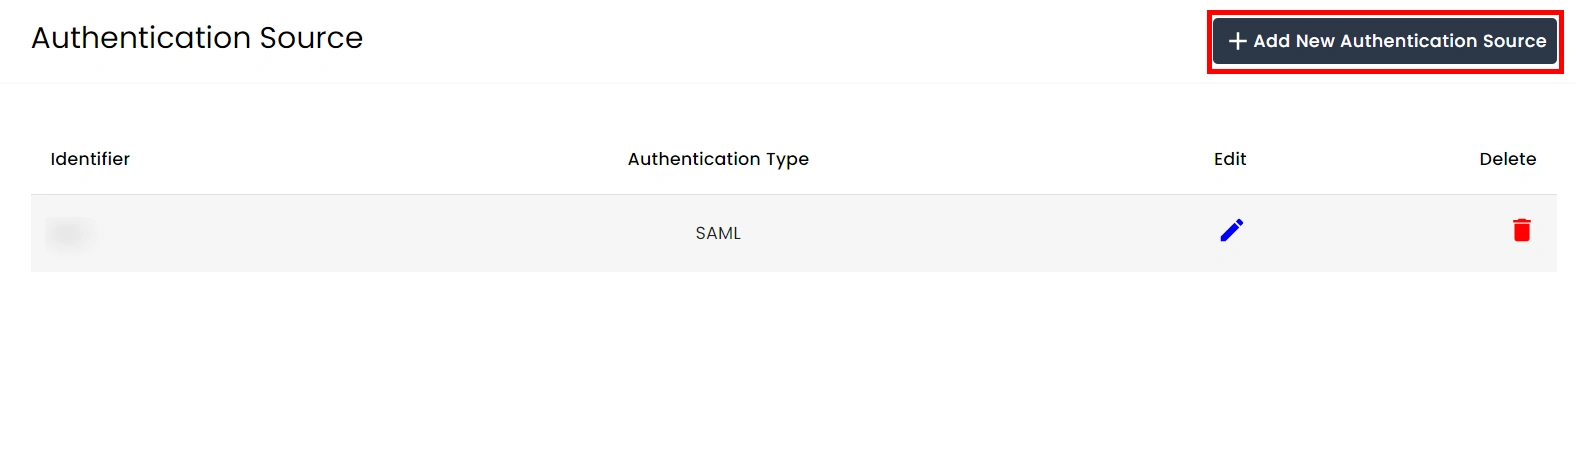 SAML Authentication with Cloud Access Security Broker (CASB) Add Authentication